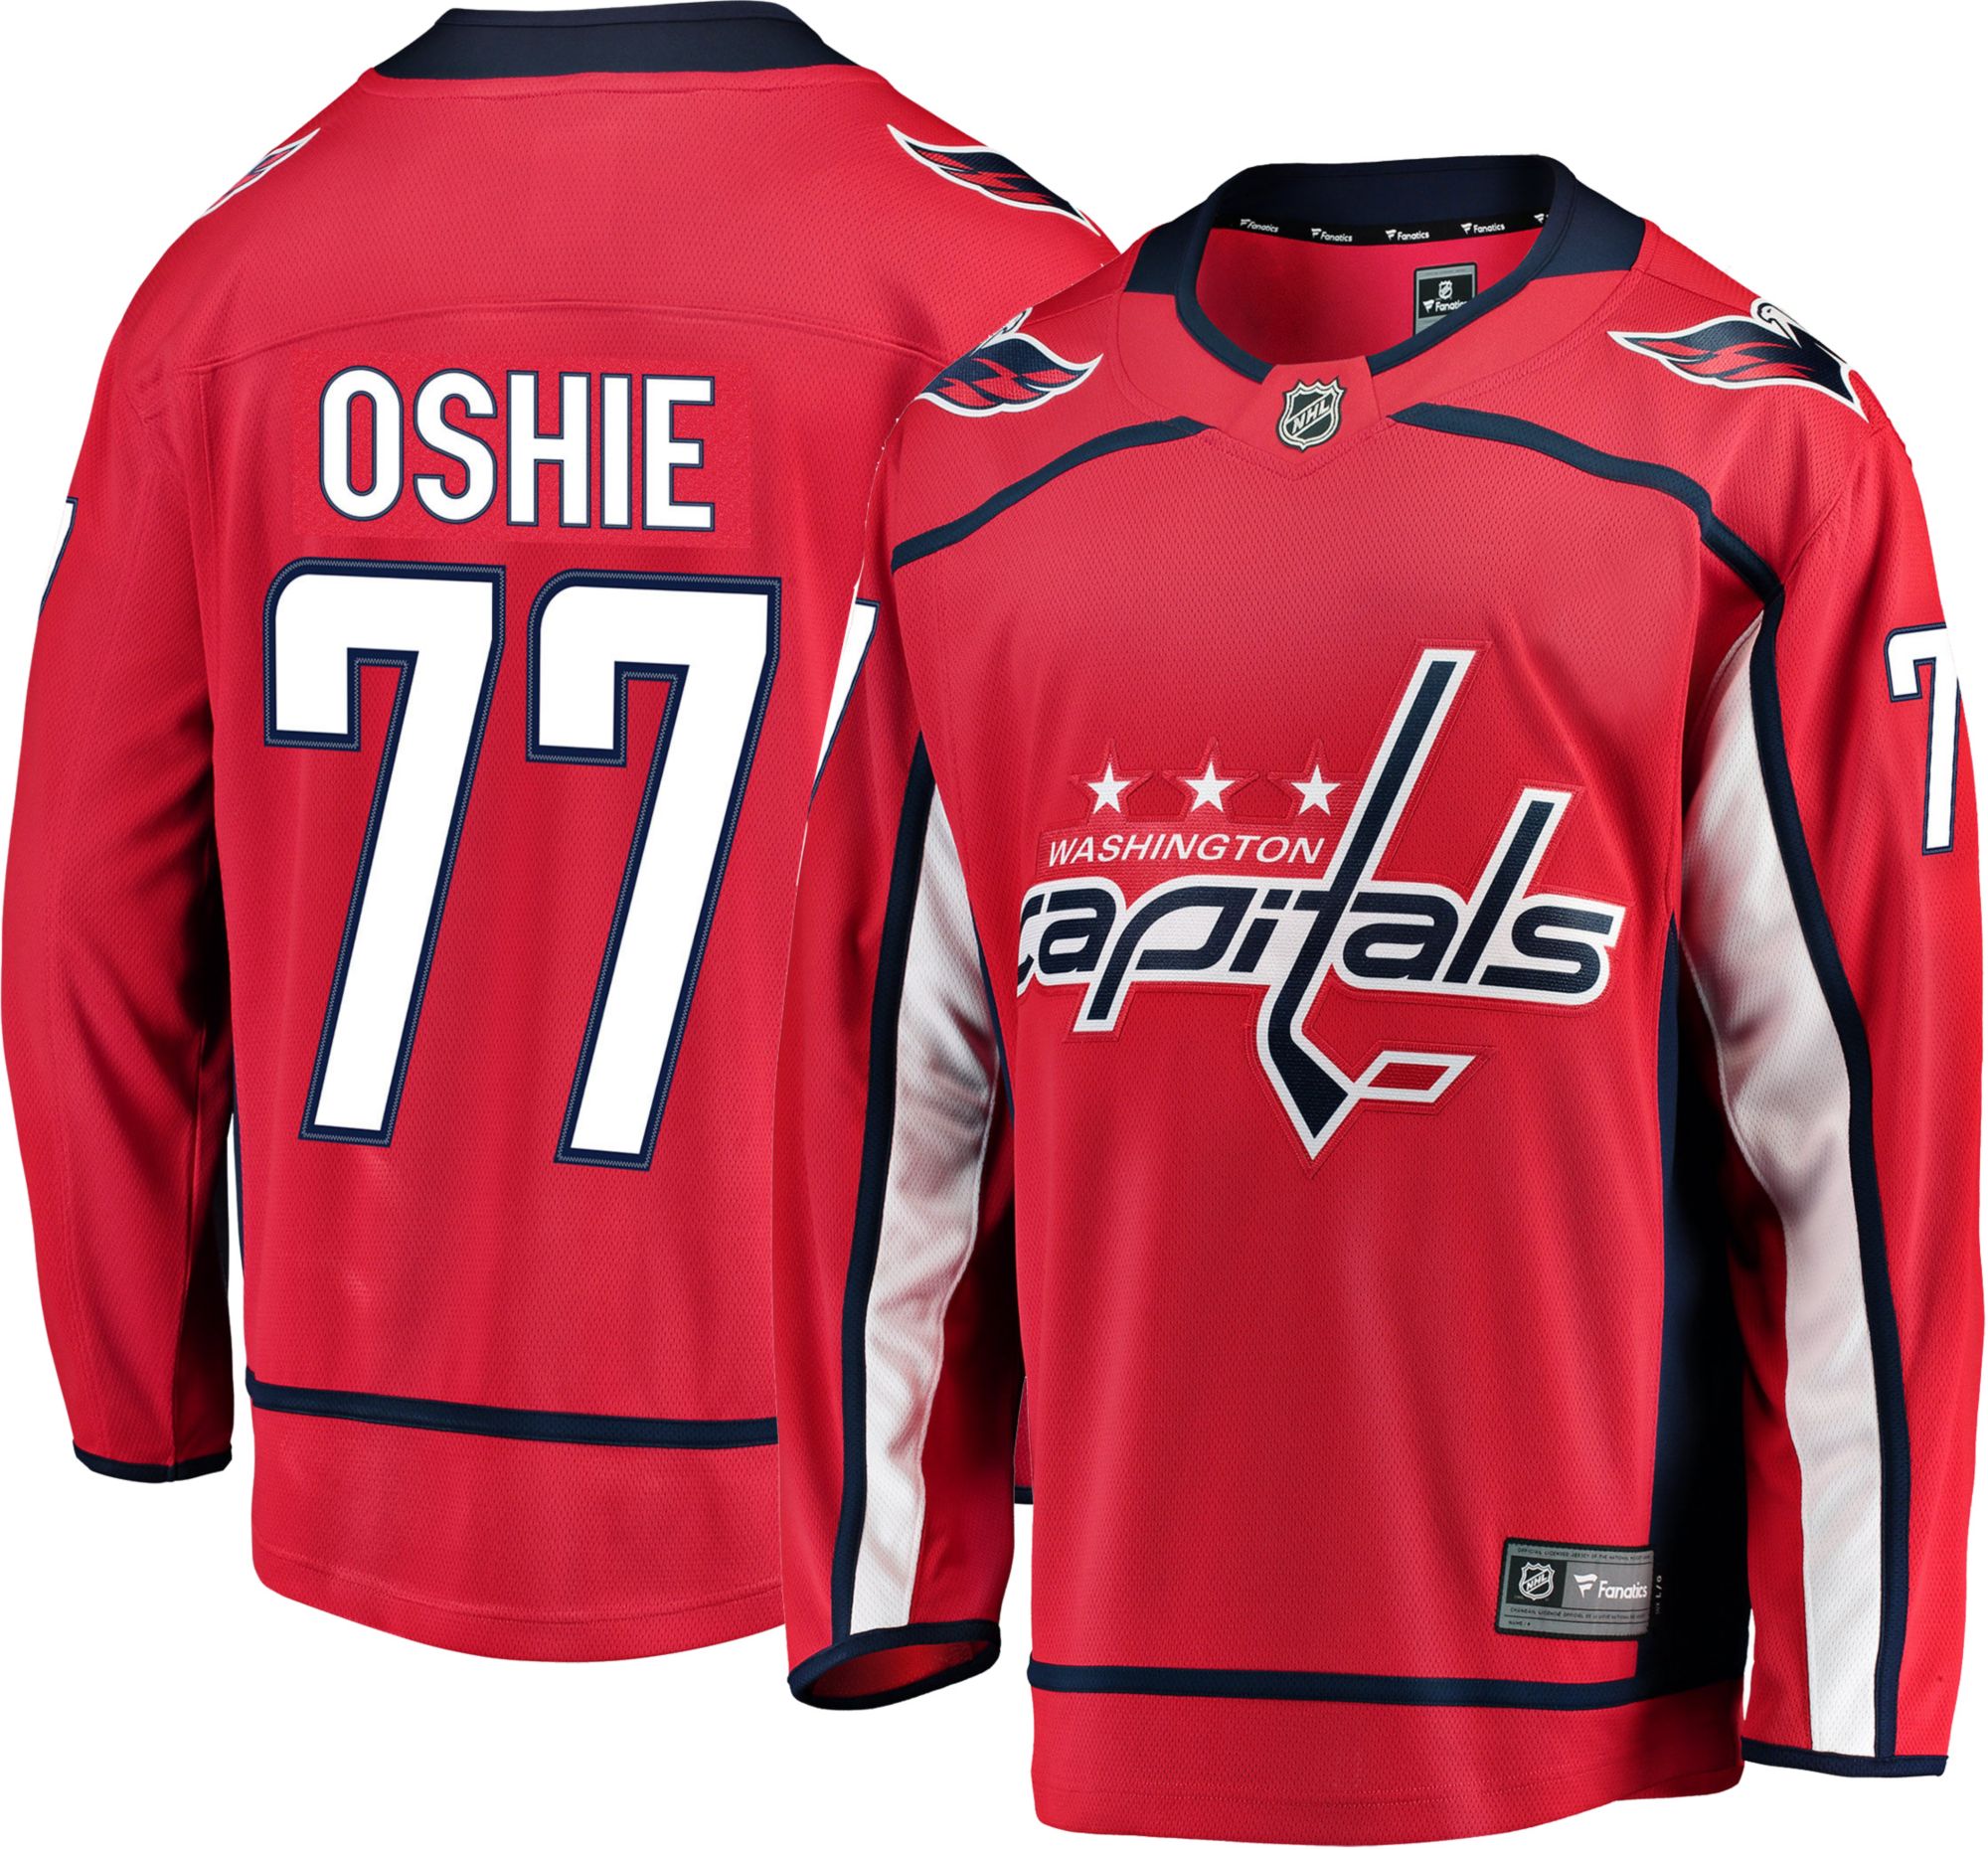 Washington Capitals #8 Alex Ovechkin 2015 Winter Classic Red Jersey on  sale,for Cheap,wholesale from China